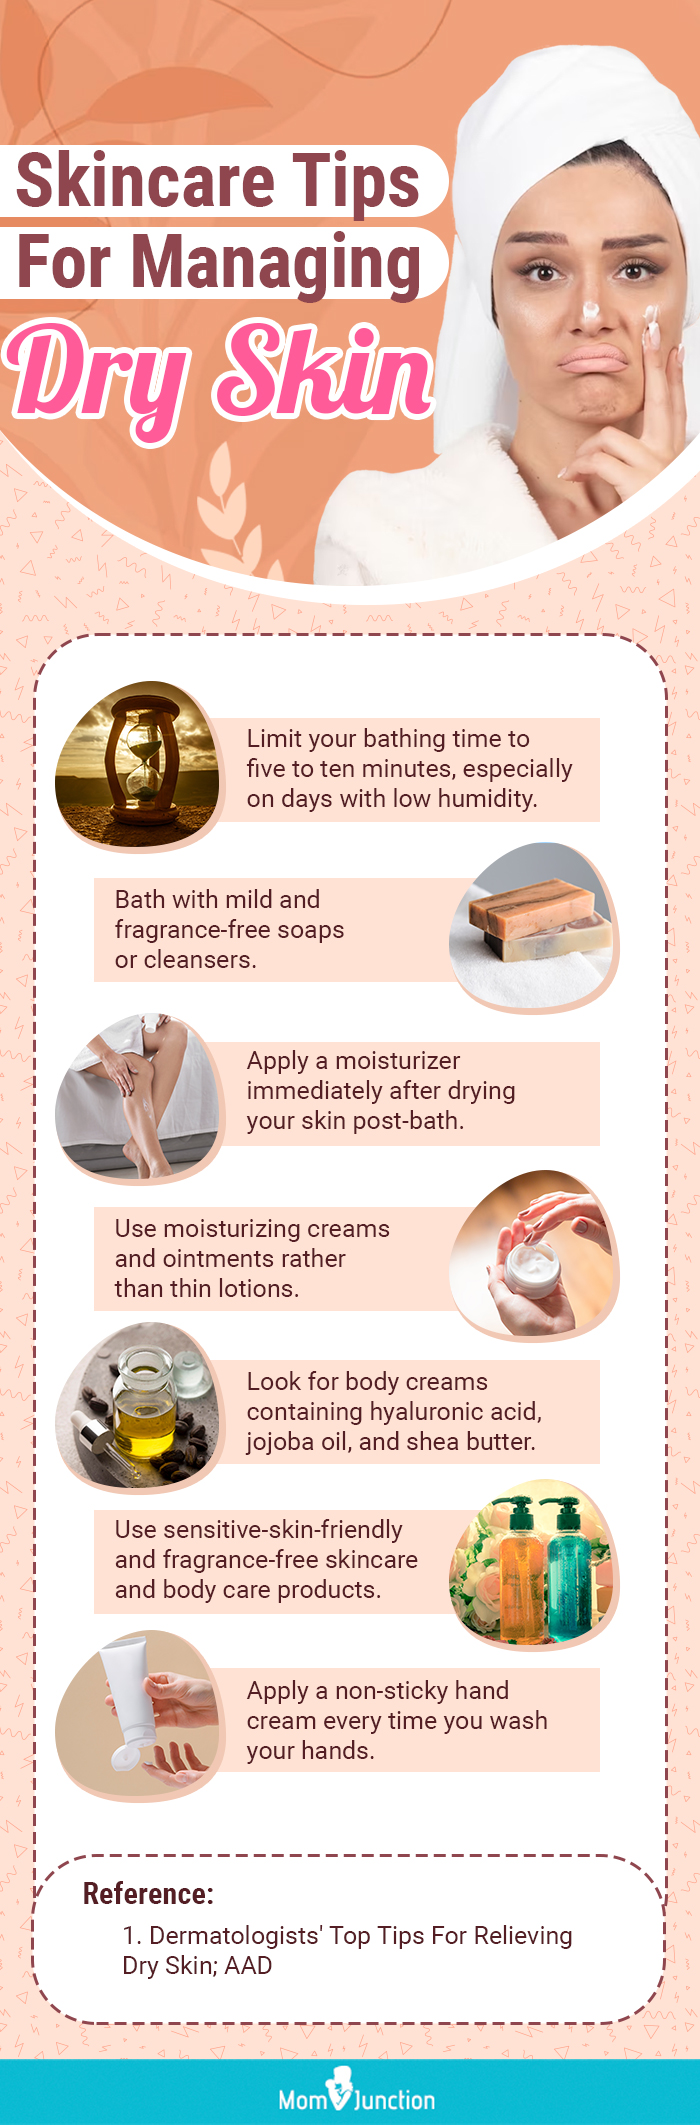 Skincare Tips For Managing Dry Skin (infographic)